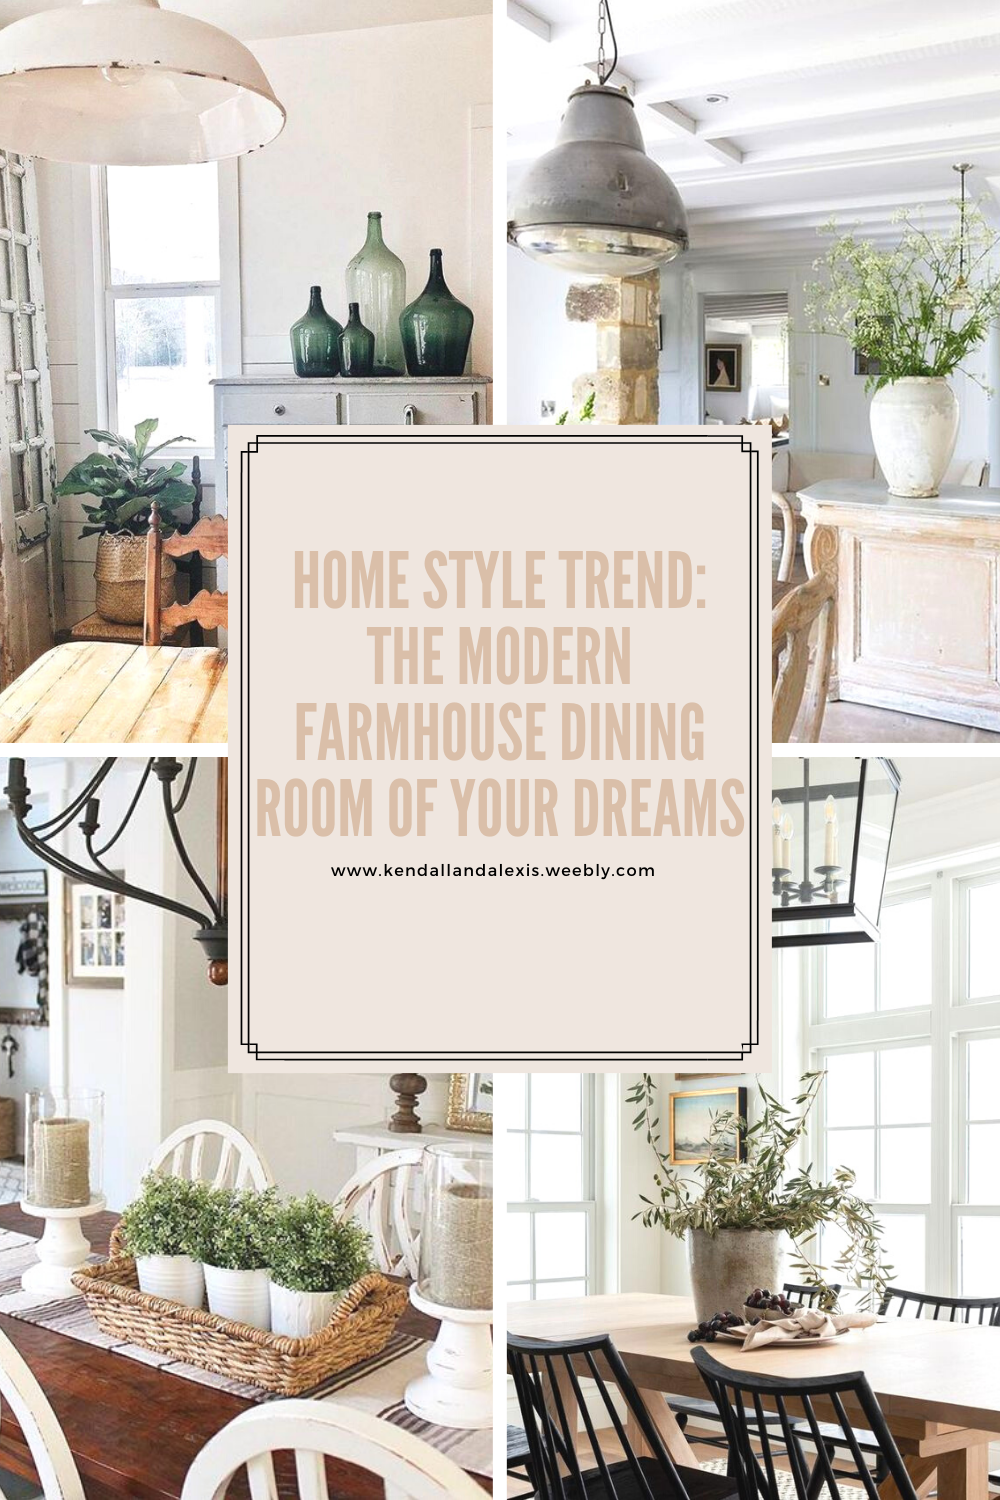 Home Style Trend: The Modern Farmhouse Dining Room of Your Dreams